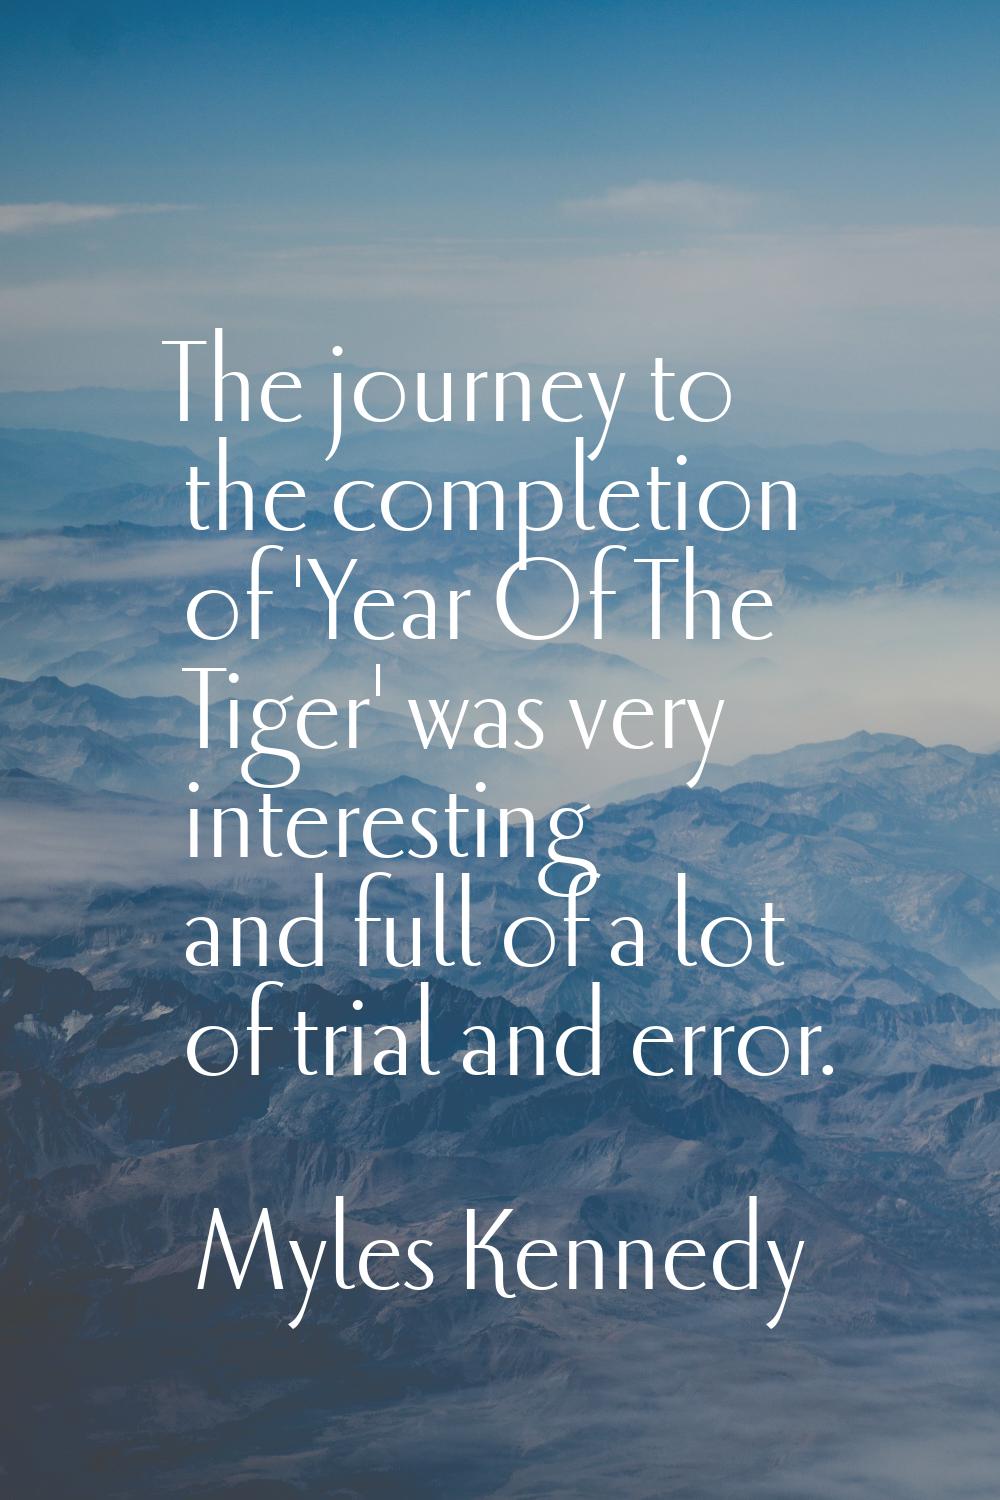 The journey to the completion of 'Year Of The Tiger' was very interesting and full of a lot of tria